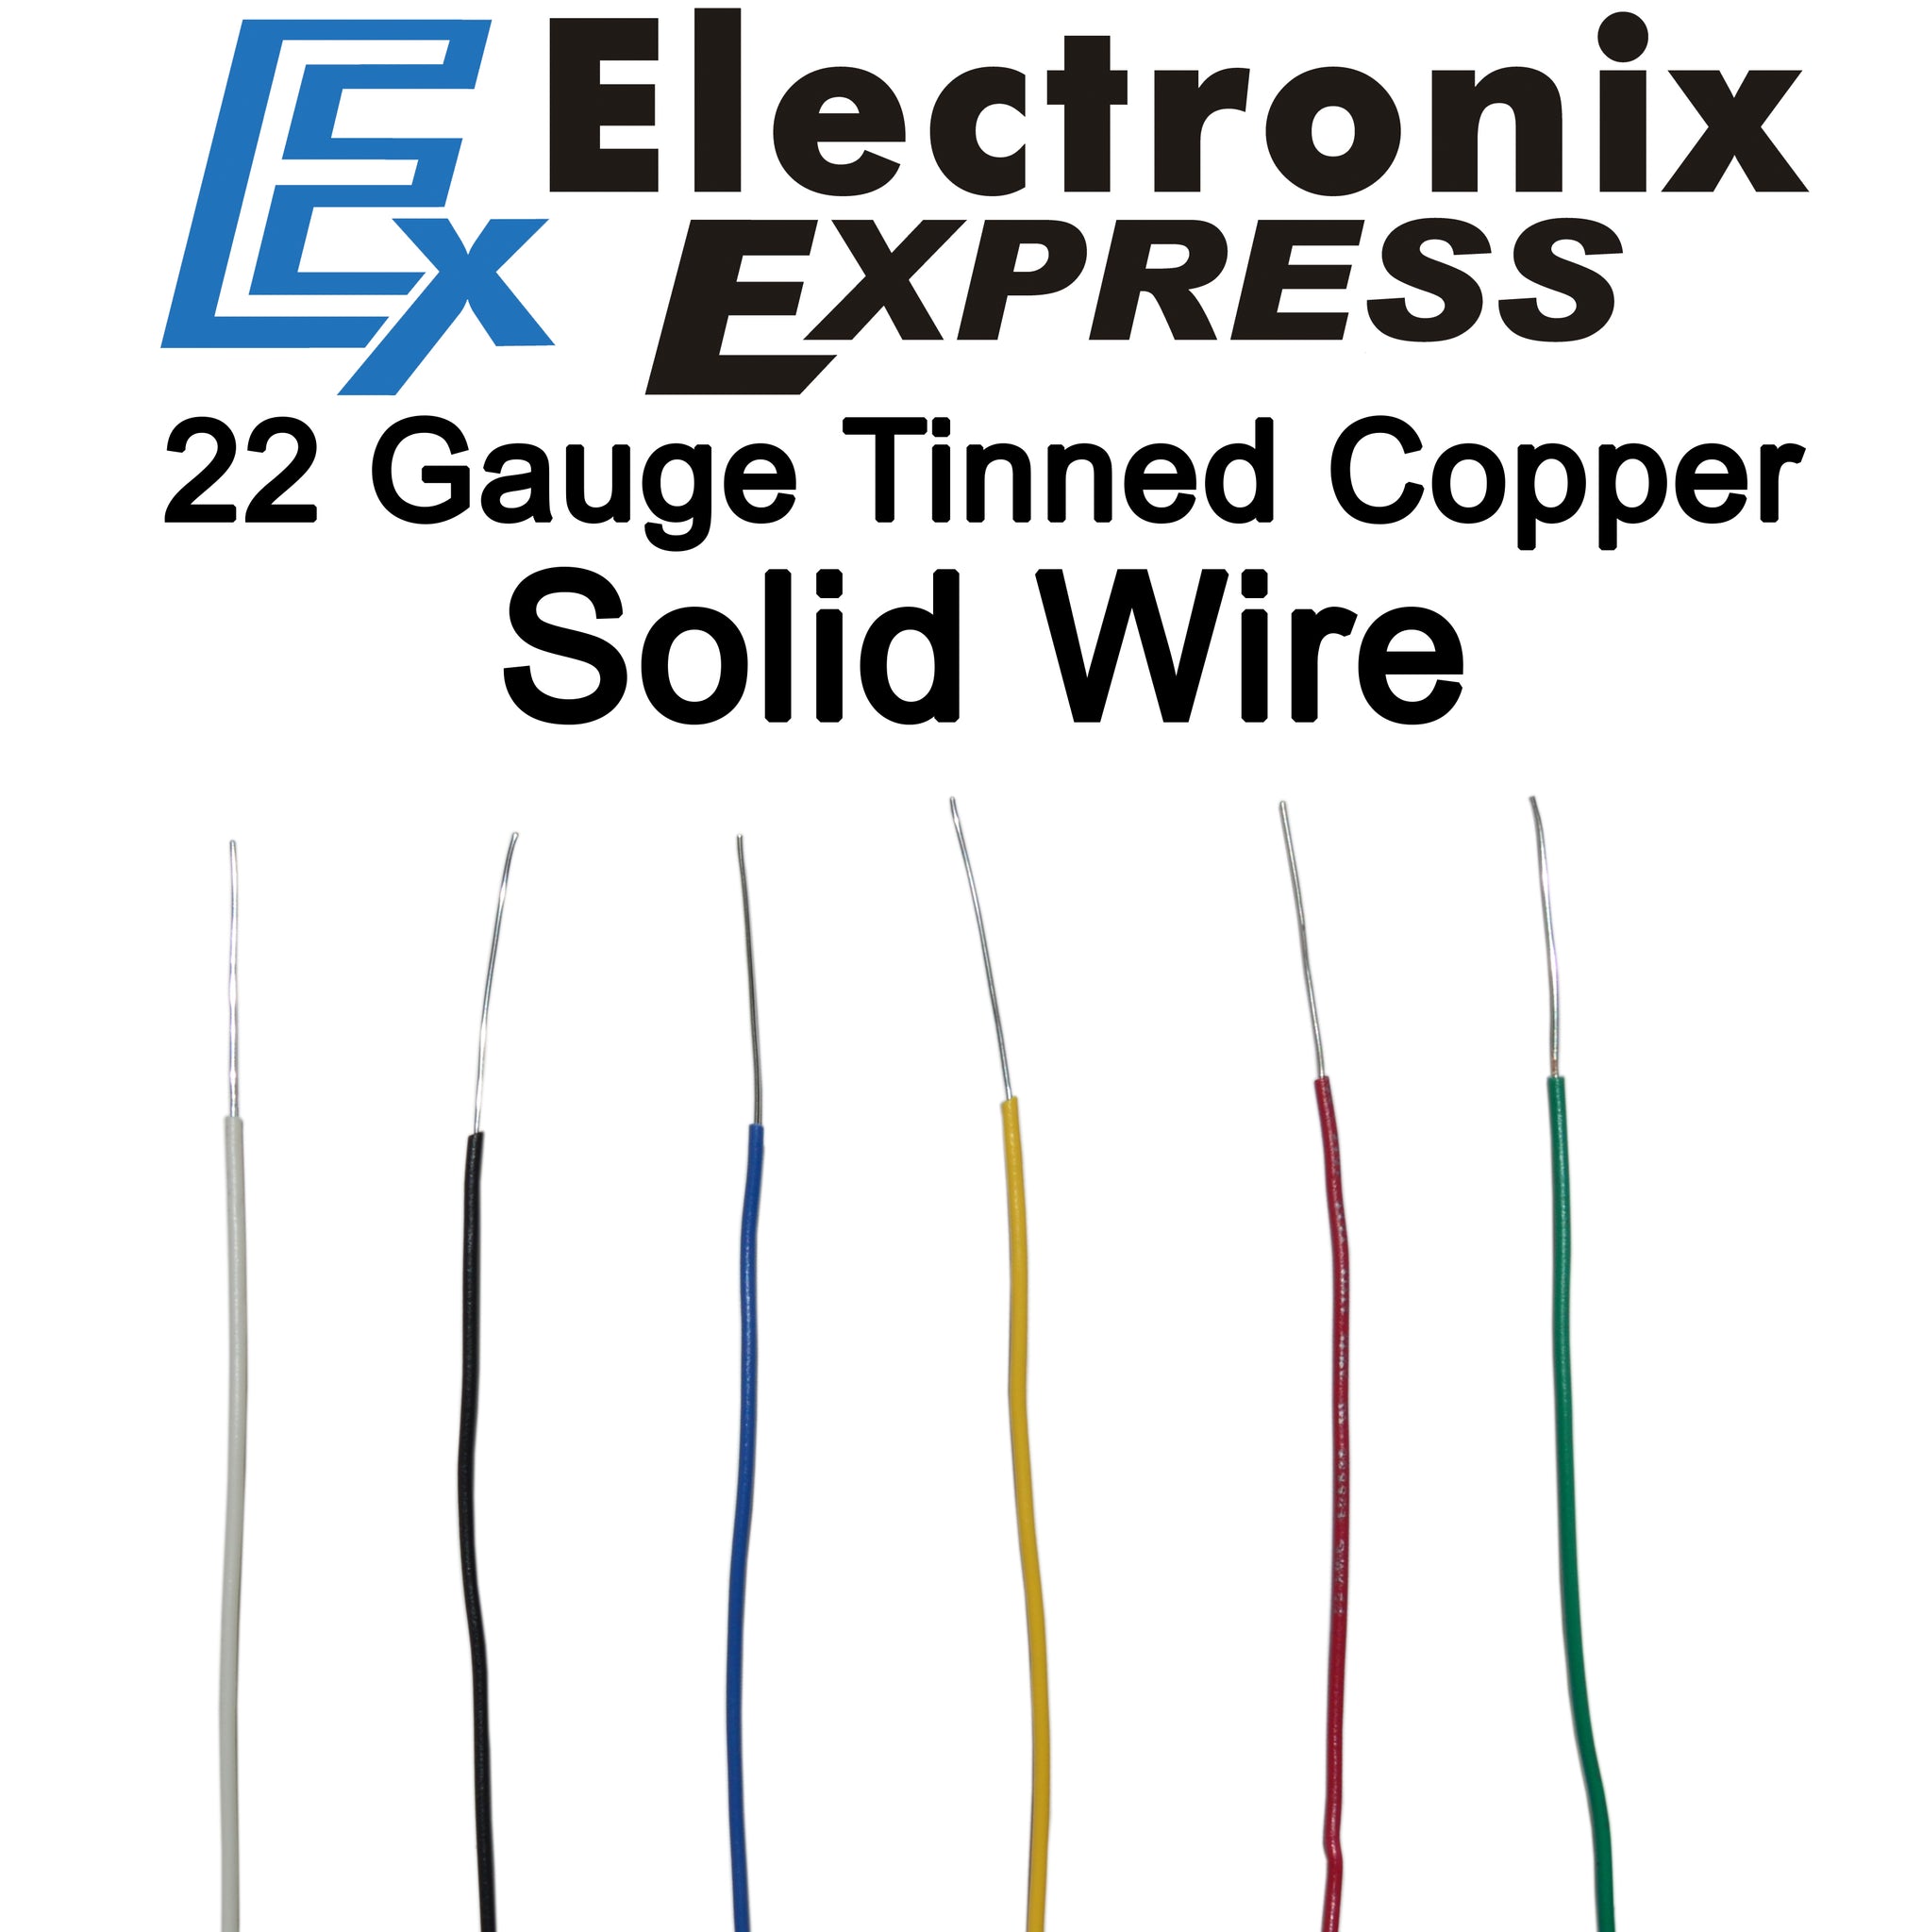 22 Gauge Hook Up Wire Kit - Solid Wire, Tinned Copper - Includes 10 Di